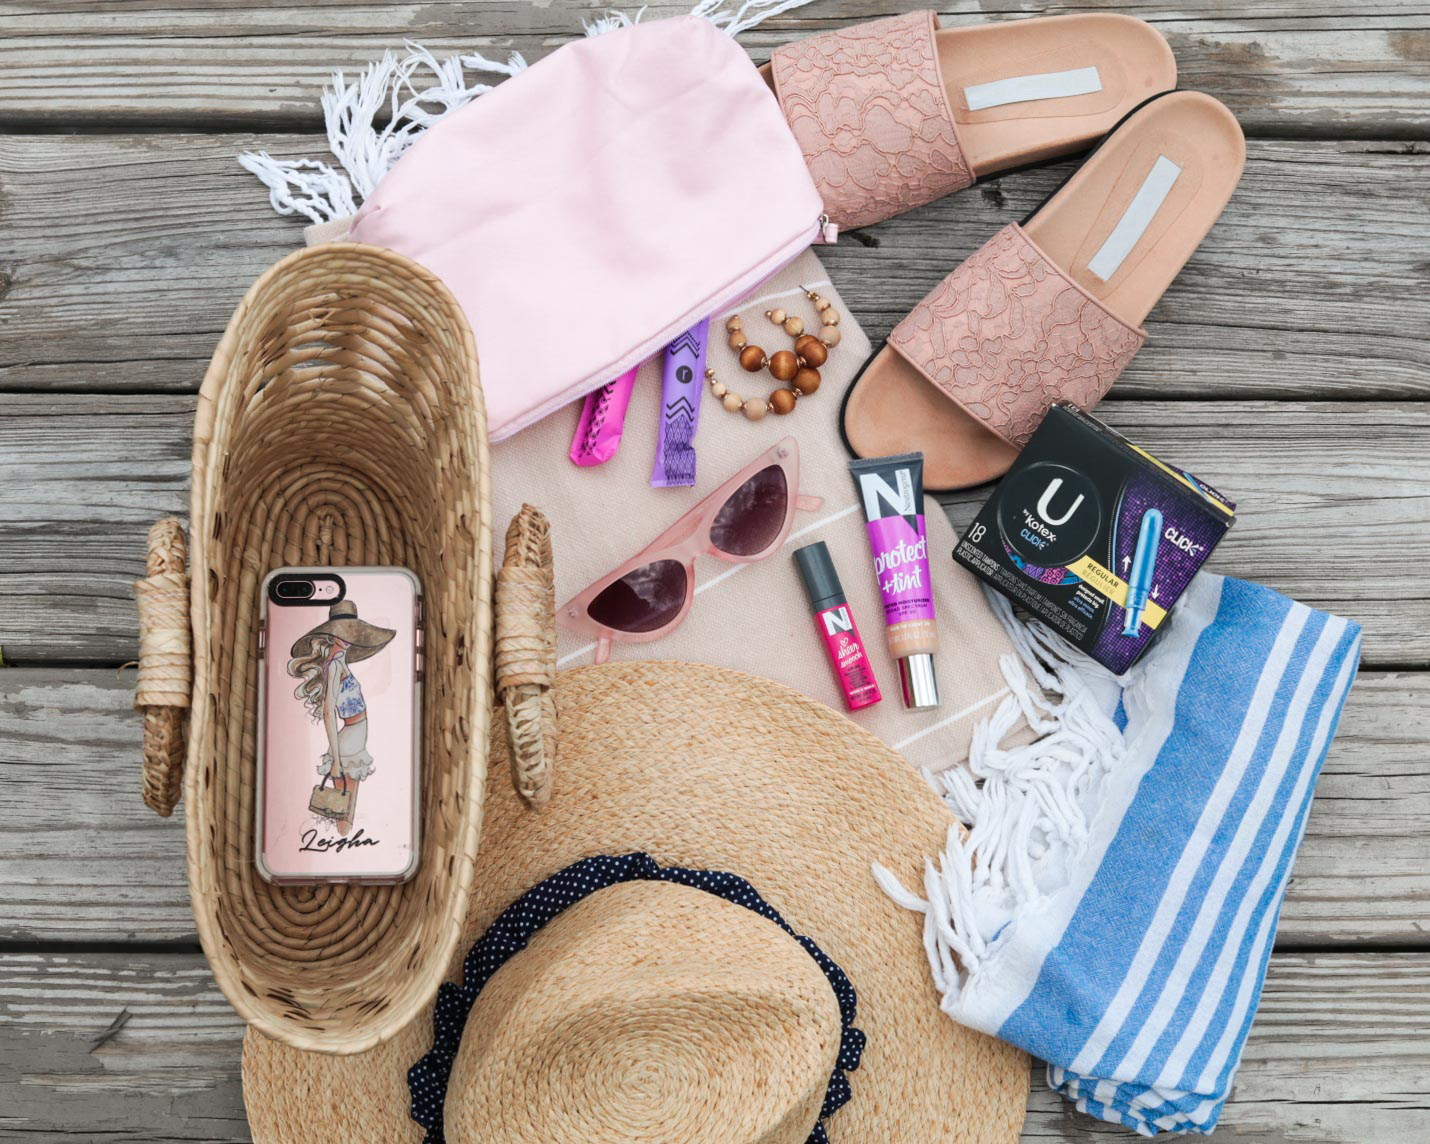 summer packing list must-haves for any getaway weekend